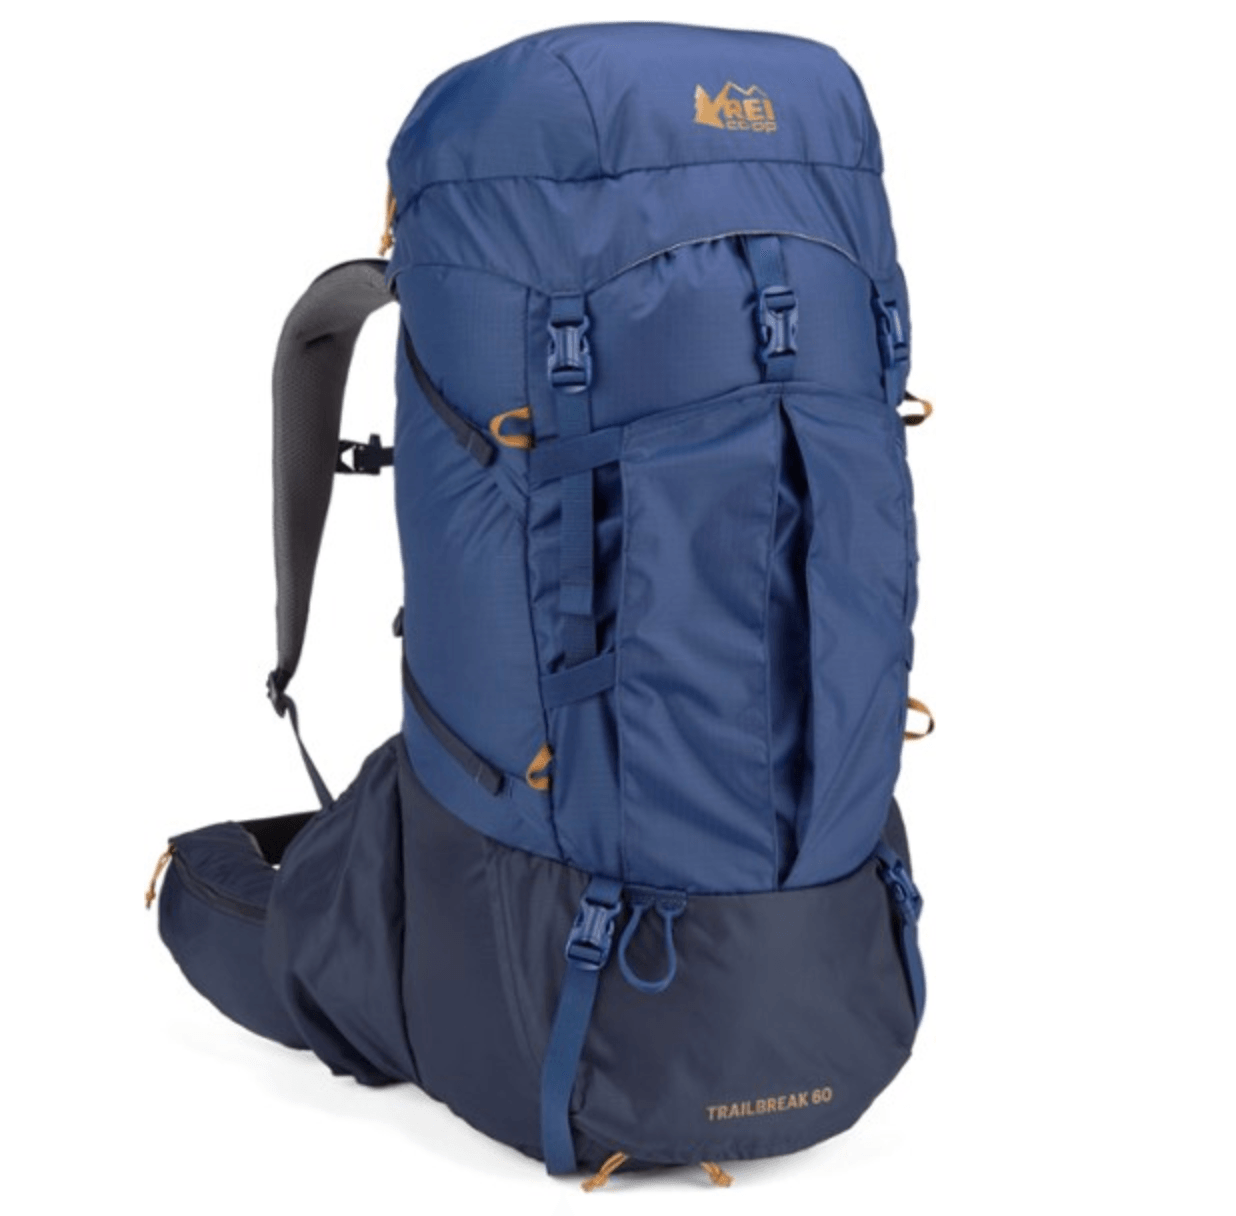 The Best Backpacking Gear Of 2020 Buyer S Guide